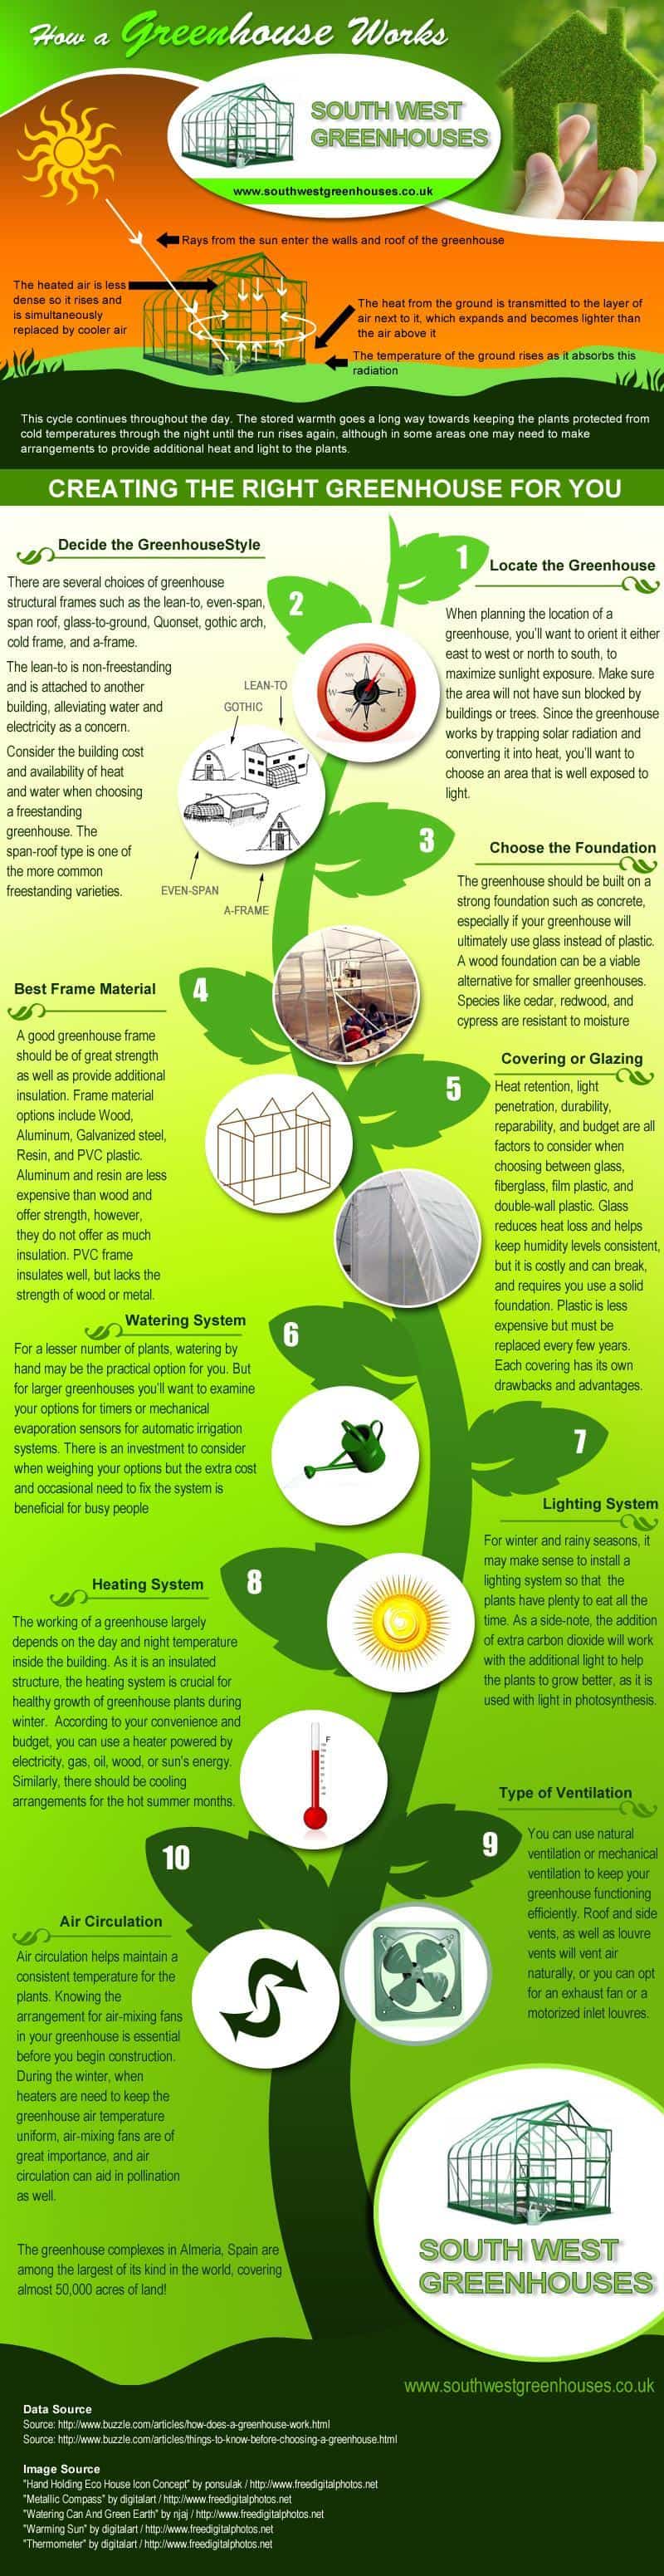 Tips on Creating a Greenhouse [infographic] - Green Home Gnome